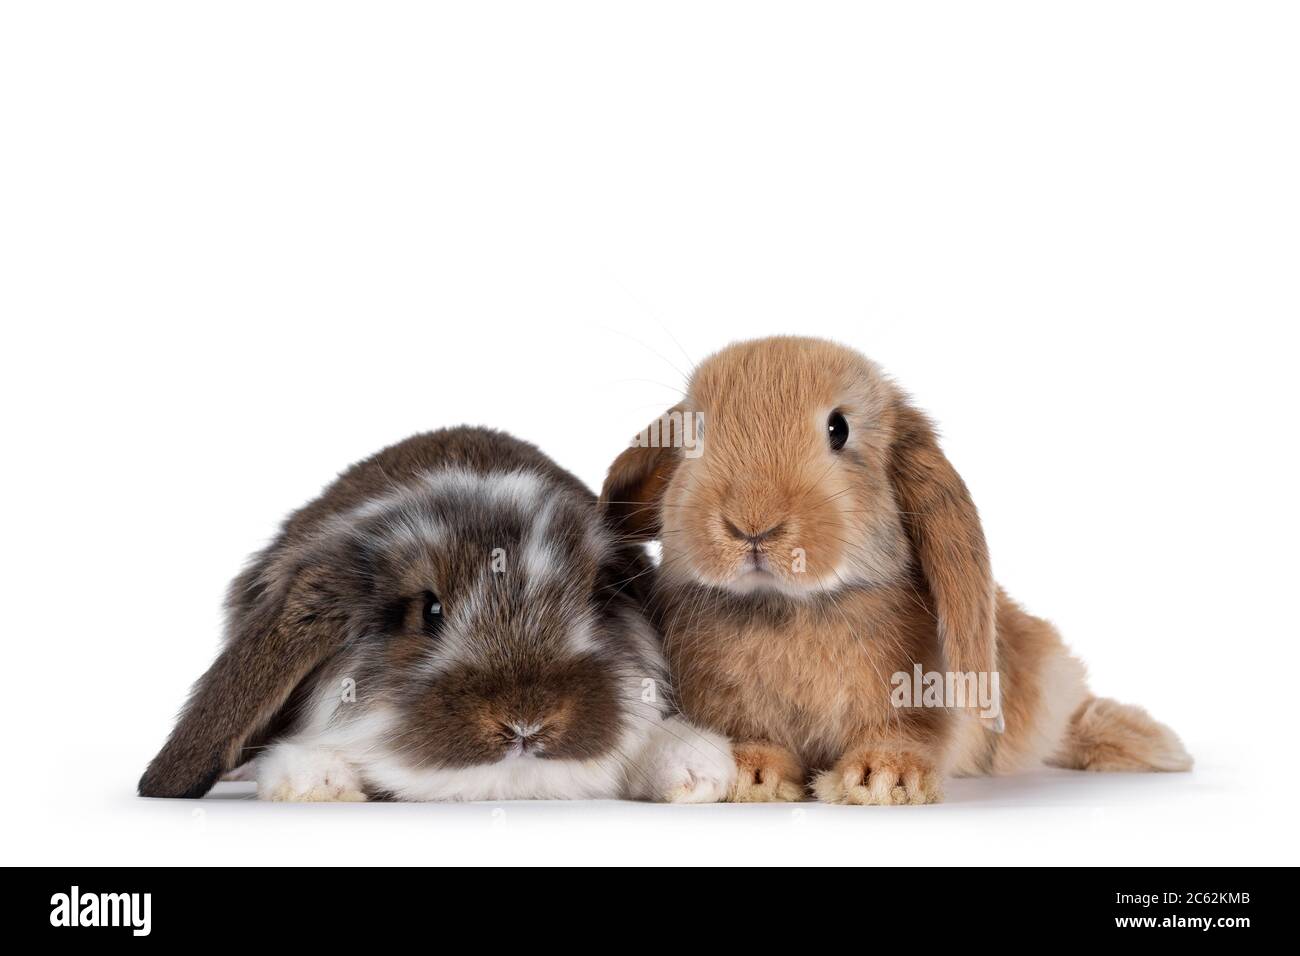 Brown with white spotted and solid brown rabbit, sitting together. Looking towards camera. Isolated on white background. Stock Photo